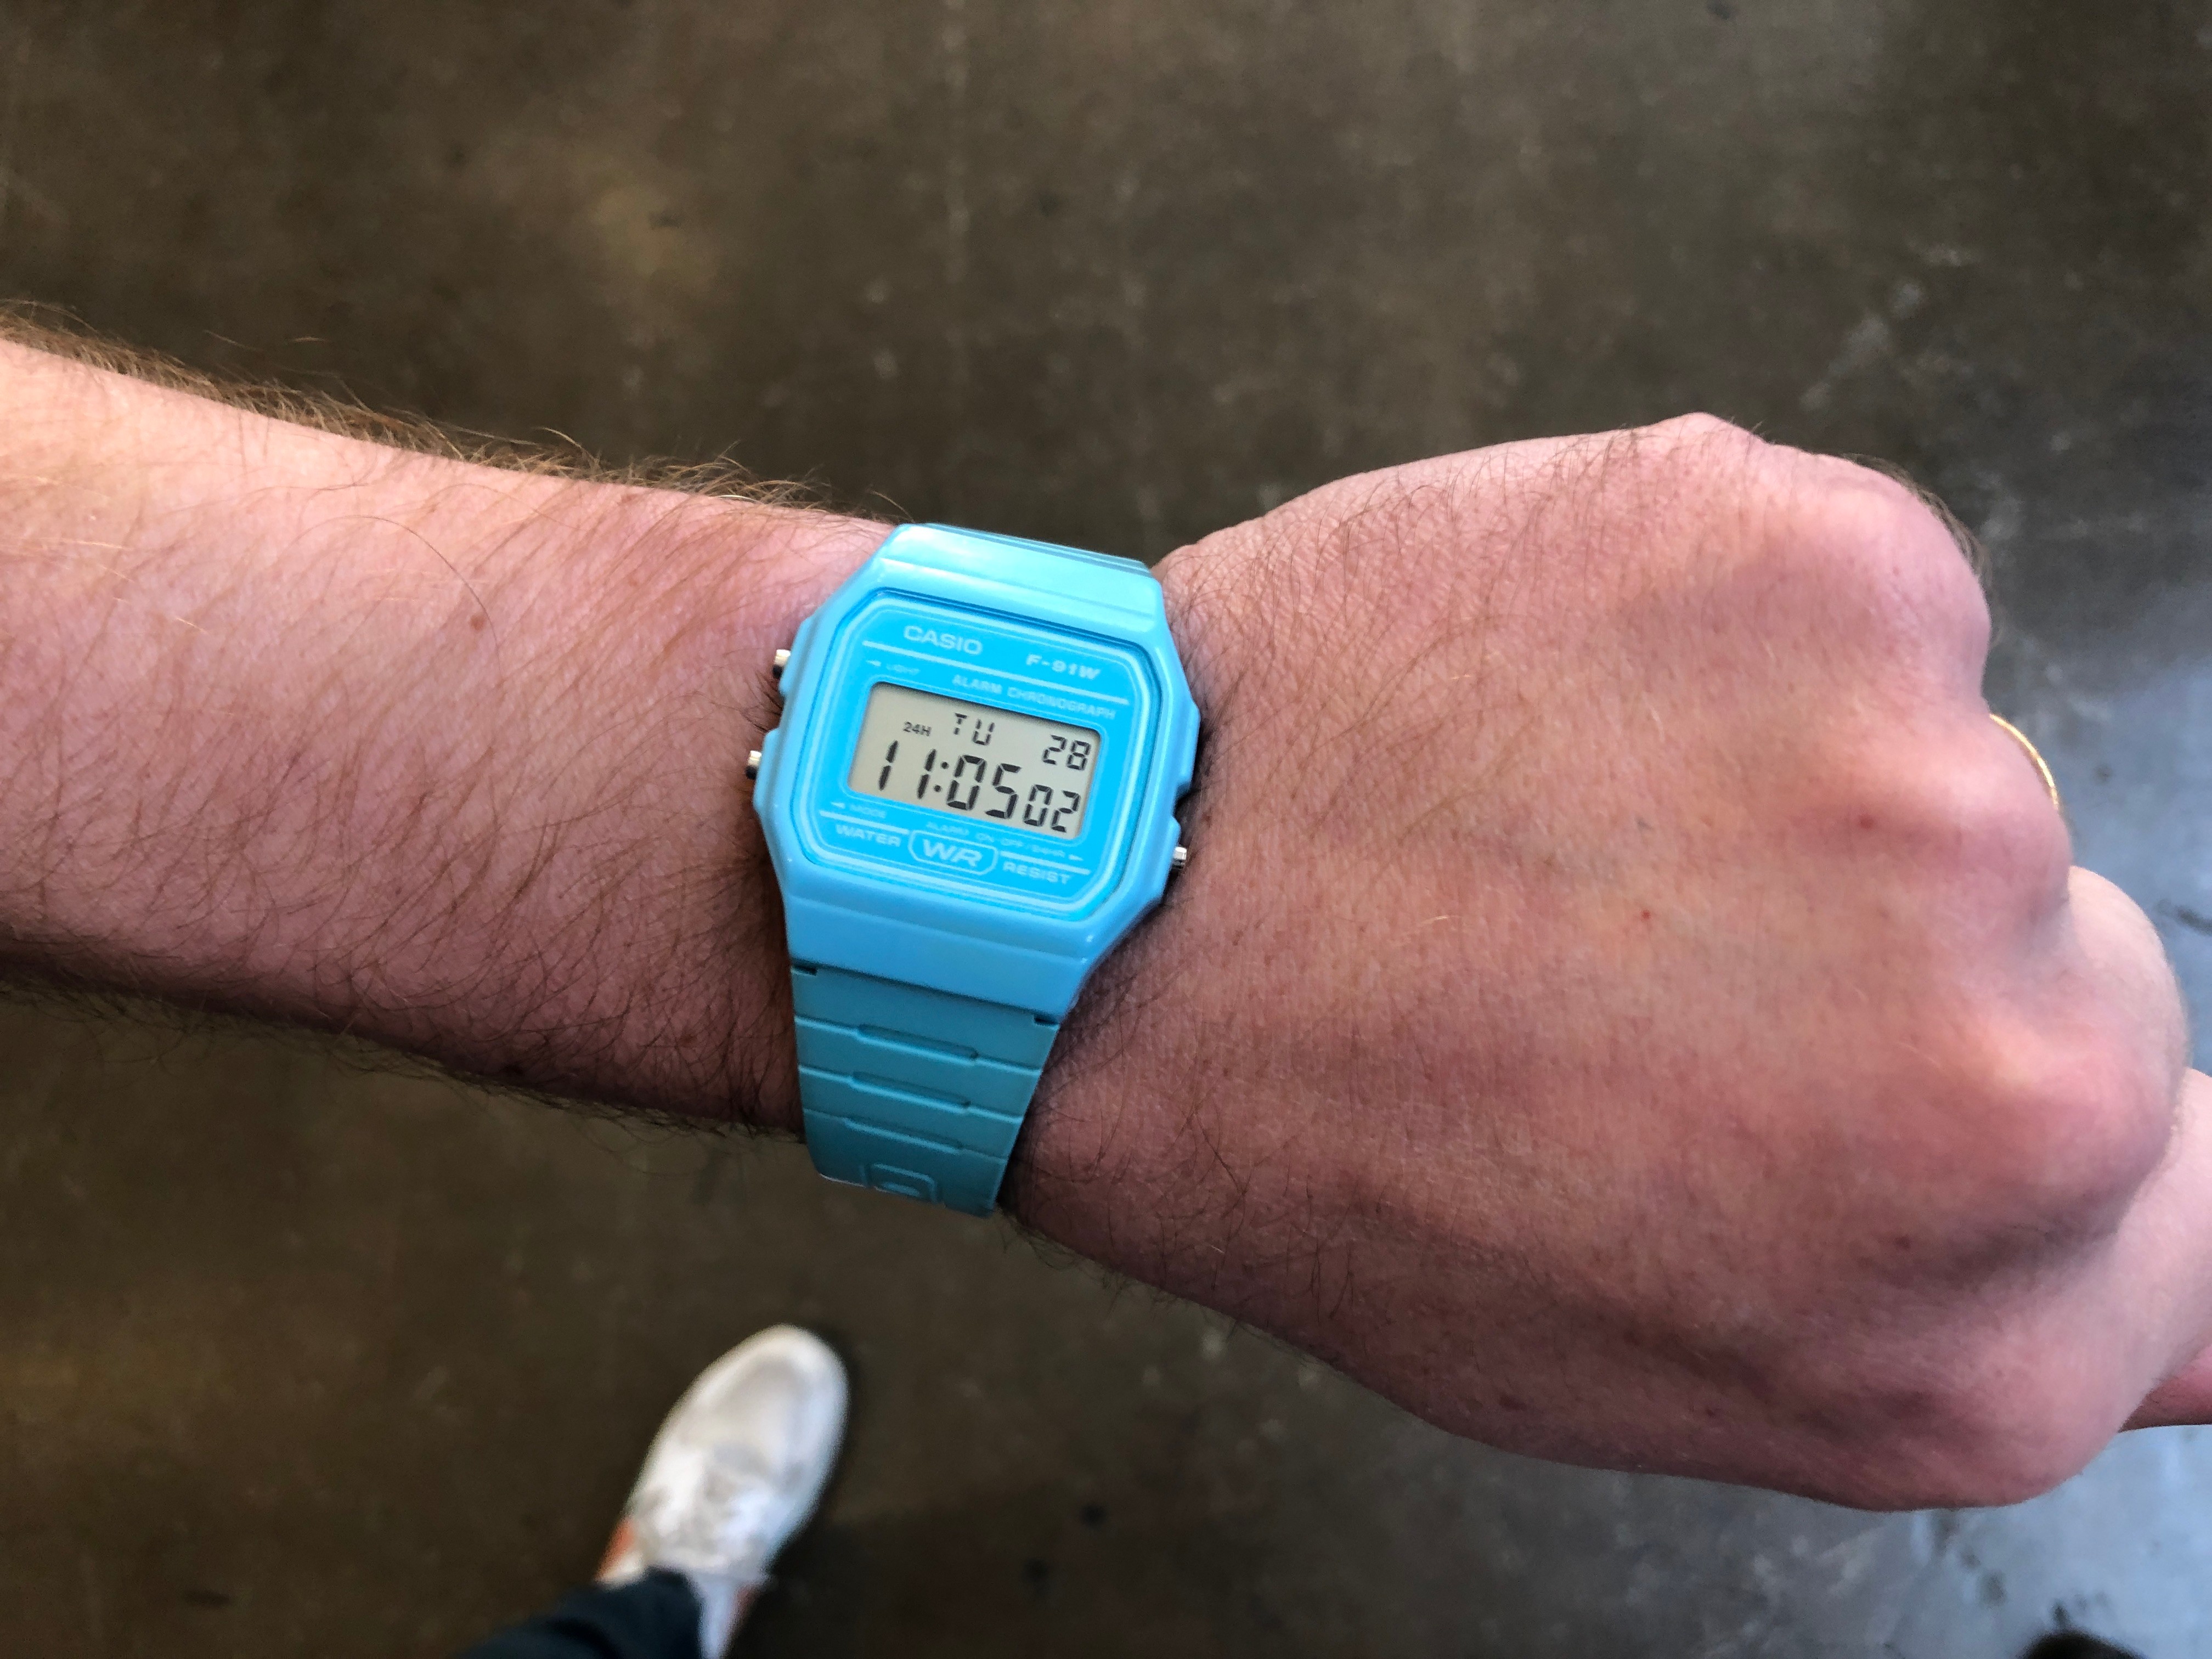 Casio] F91 Friday squad where you at? : r/Watches